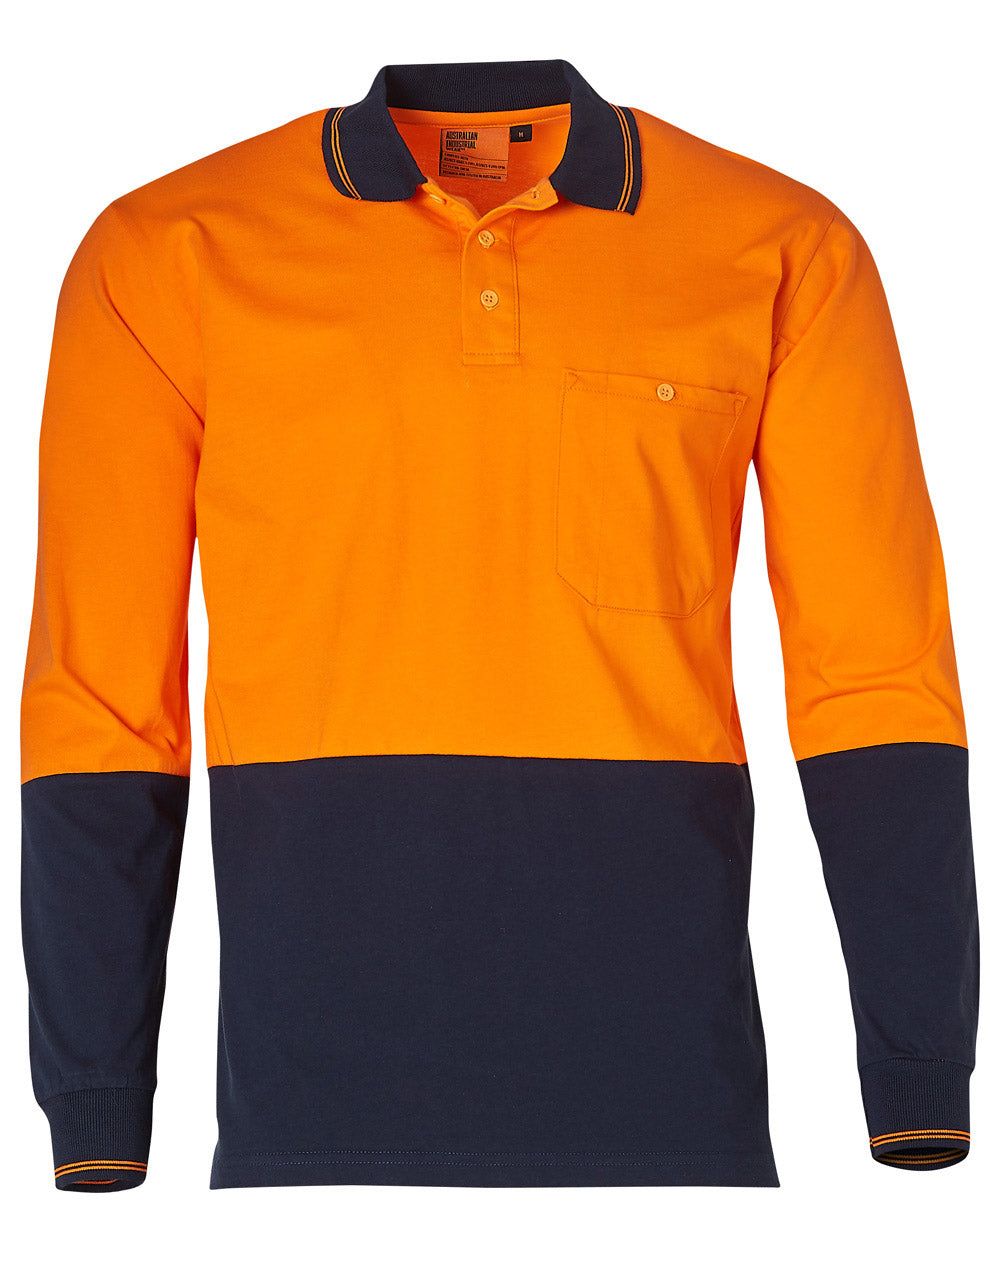 Hivis Long Sleeve Cotton Polo Shirt - made by AIW